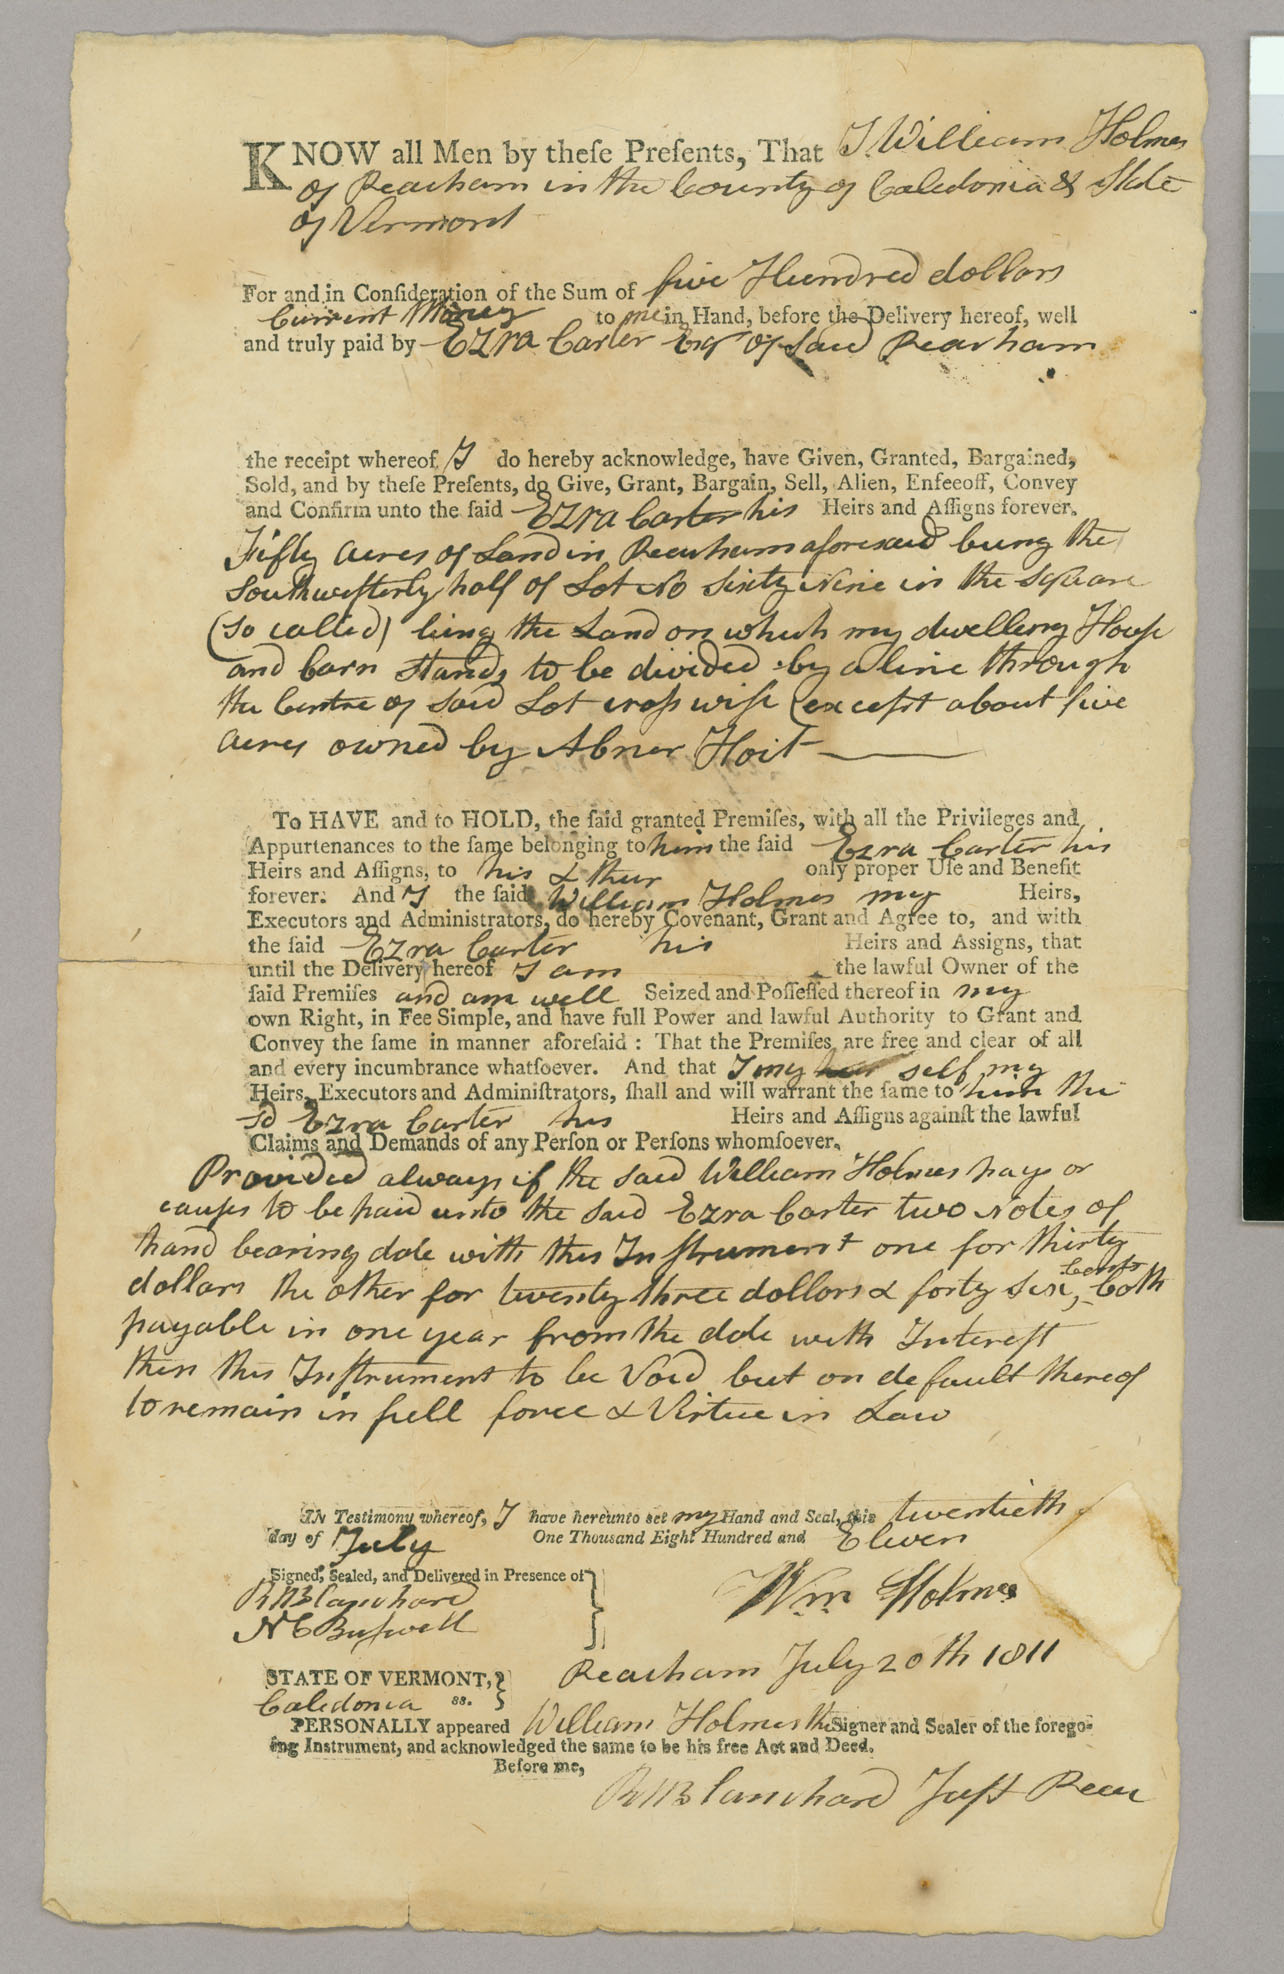 Land deed of sale, William Holmes to Ezra Carter, Page 1